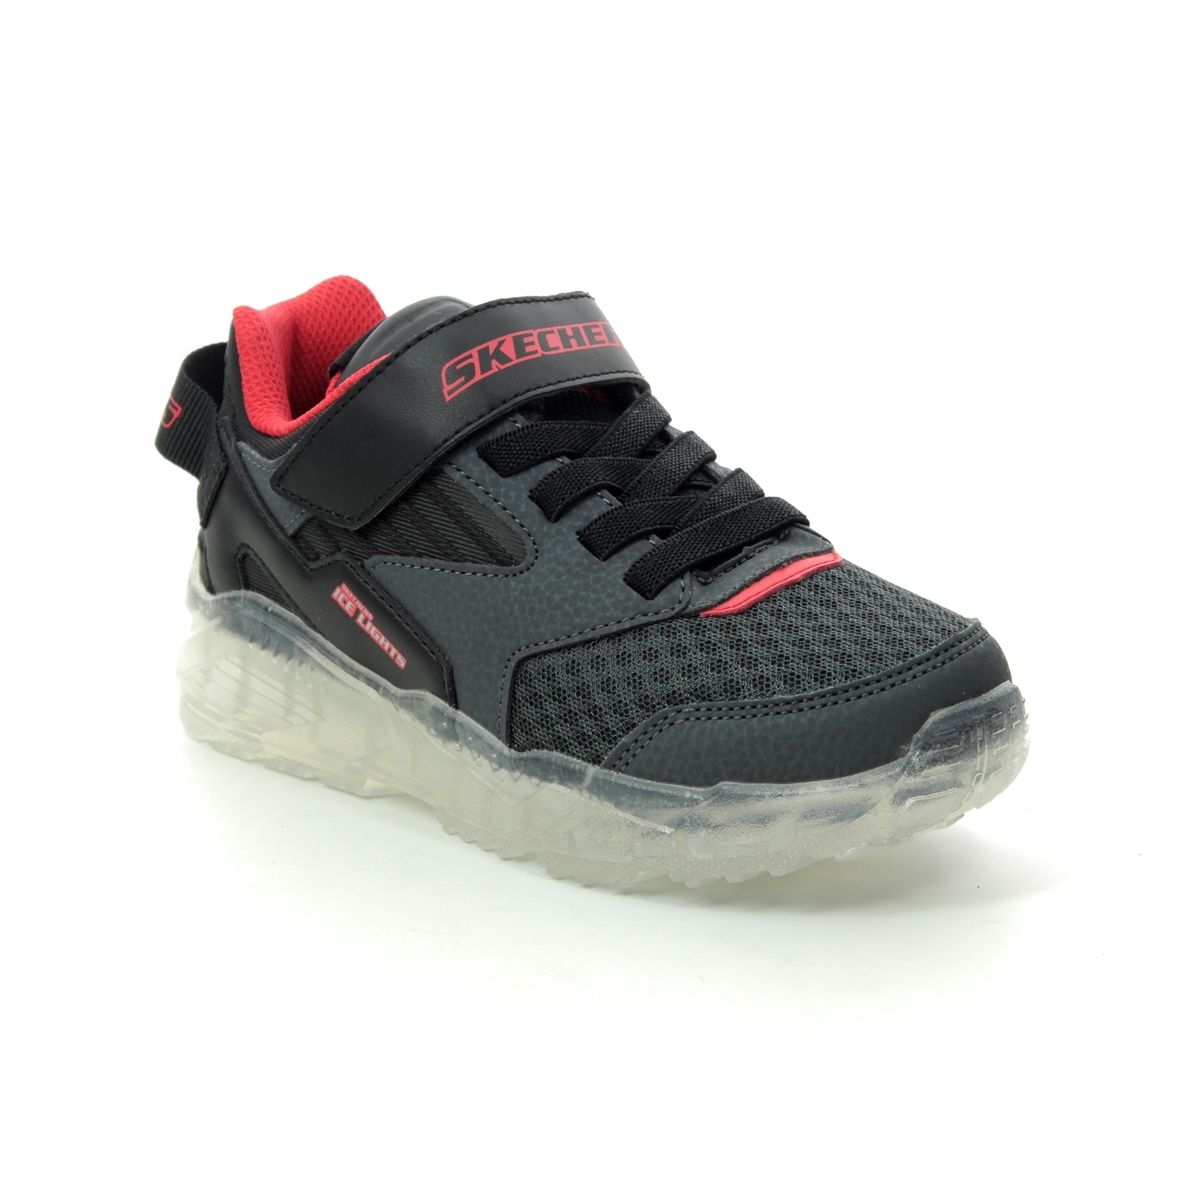 Skechers Arctic Tron Charcoal Black Kids Trainers 90661 In Size 30 In Plain Charcoal Black For kids